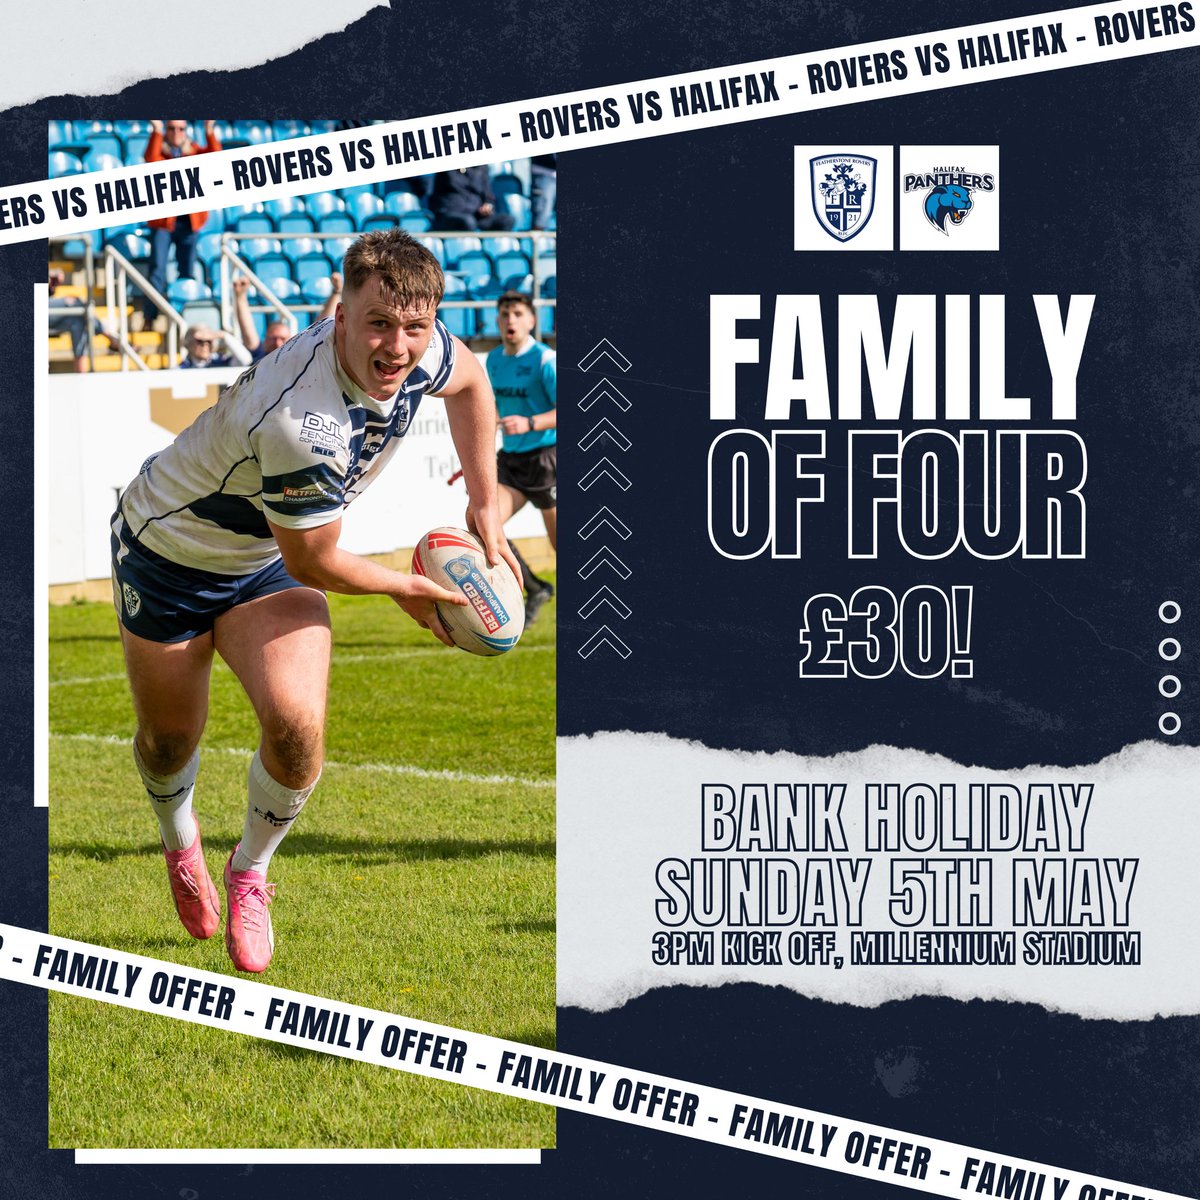 Be with us at the Millennium Stadium on Bank Holiday Sunday! ☀️ 🏉 We face Halifax on Sunday 5th May and a family ticket (2 adults, 2 juniors) can be purchased for just £30!! 😱 Email martin.vickers@featherstonerovers.co.uk to take advantage!! Don’t miss out ‼️ #BlueWall